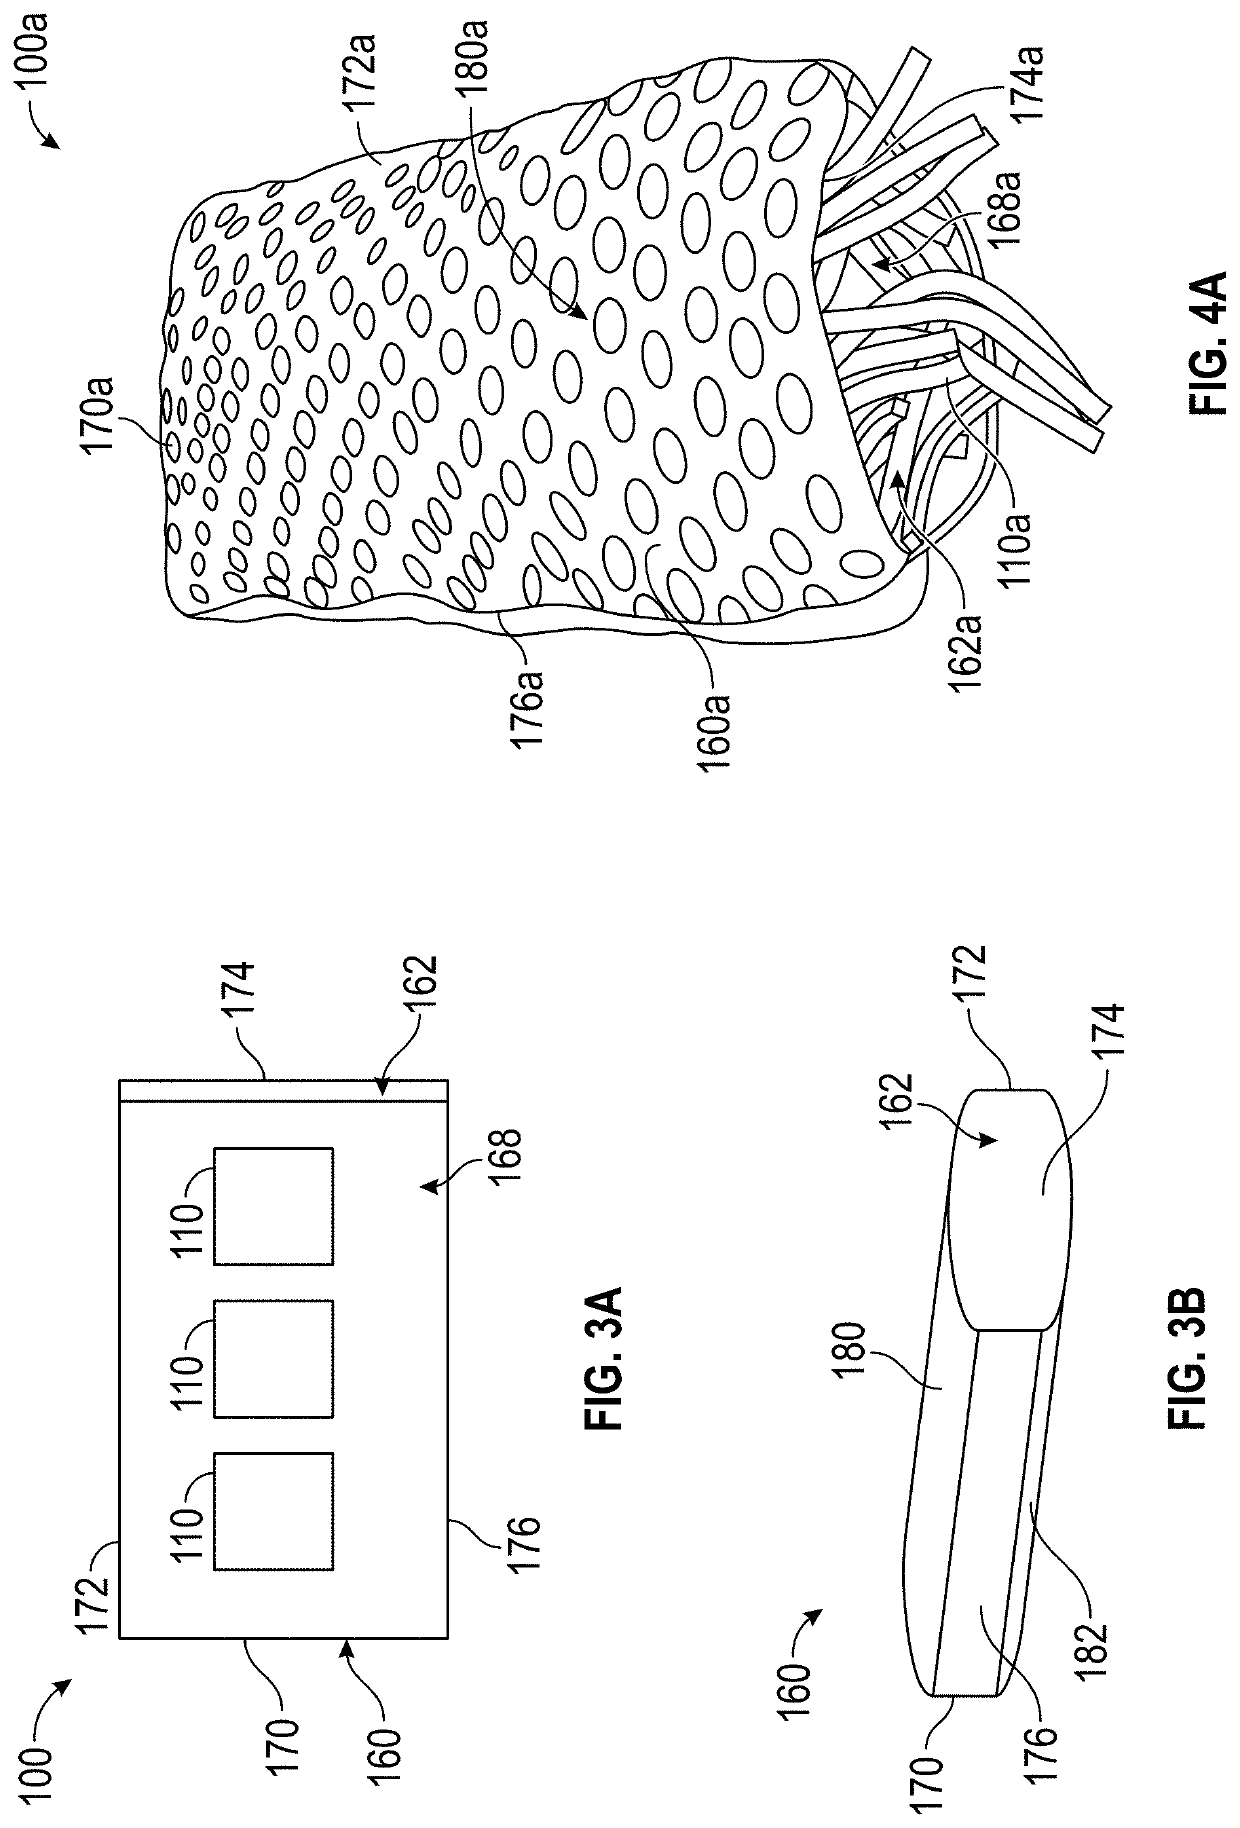 Personal support device with elongate inserts